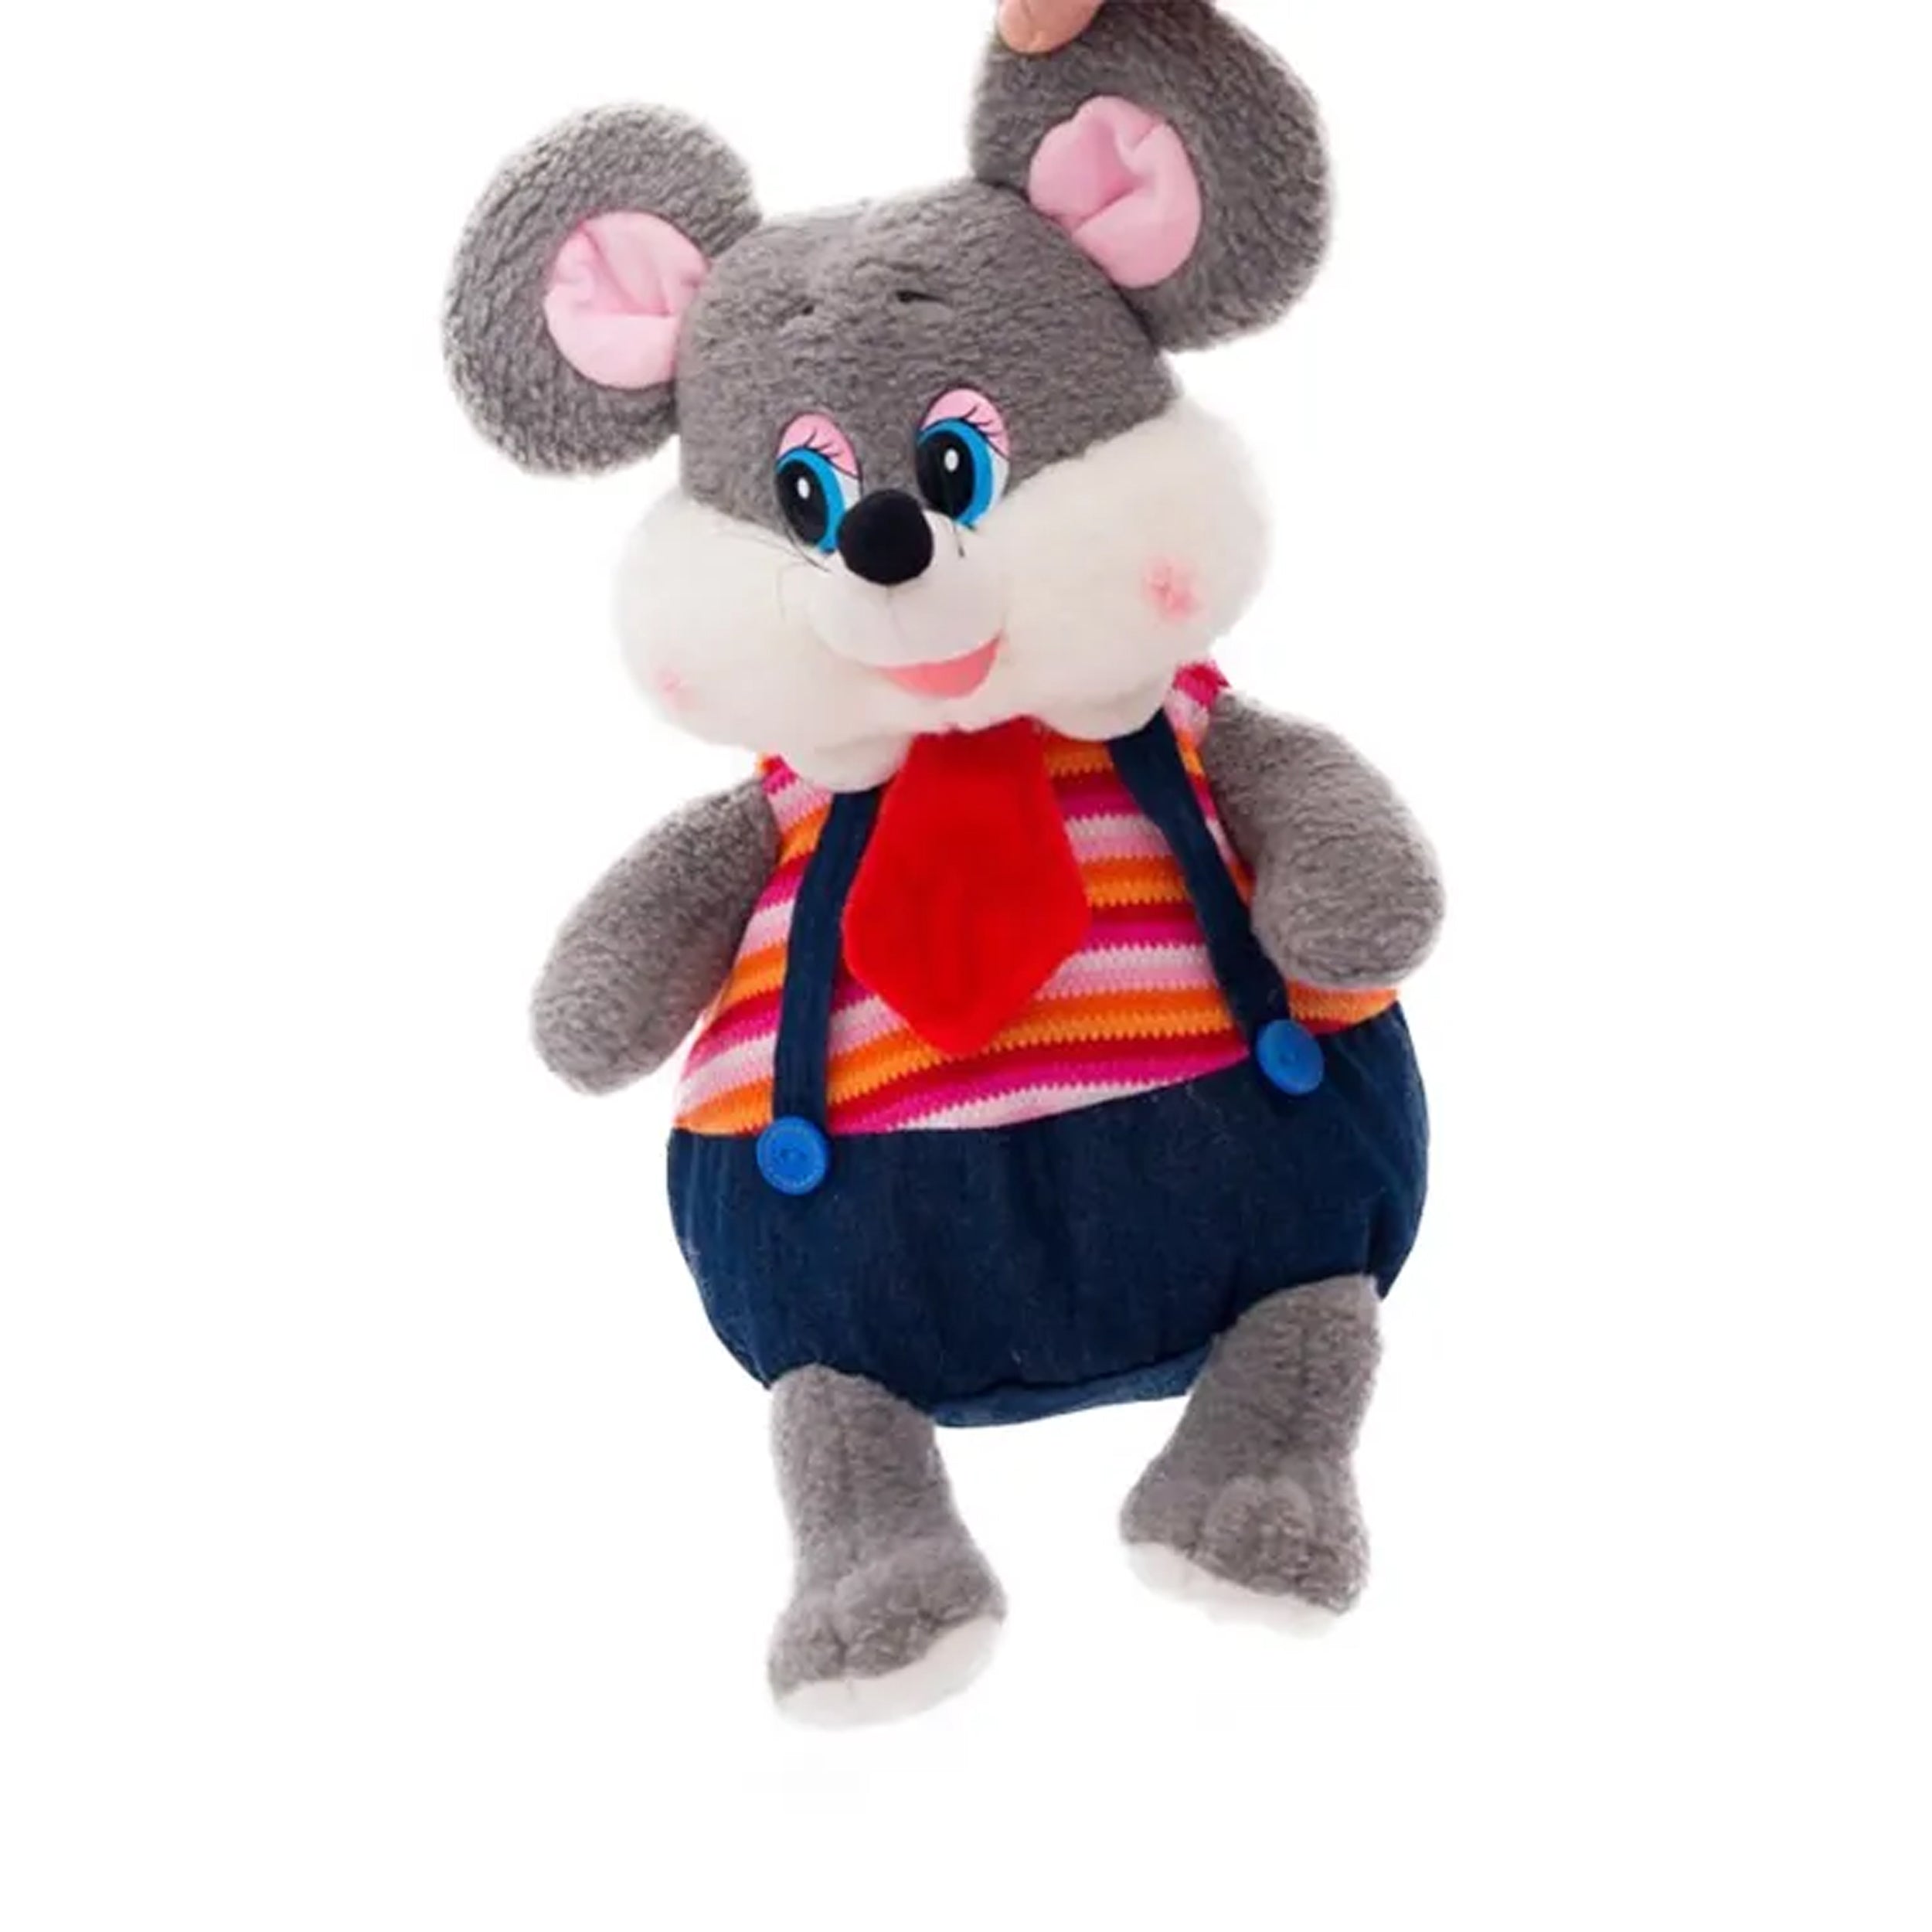 Adorable Animal Chocolate Candy Mouse Soft Toy - Perfect for Kids